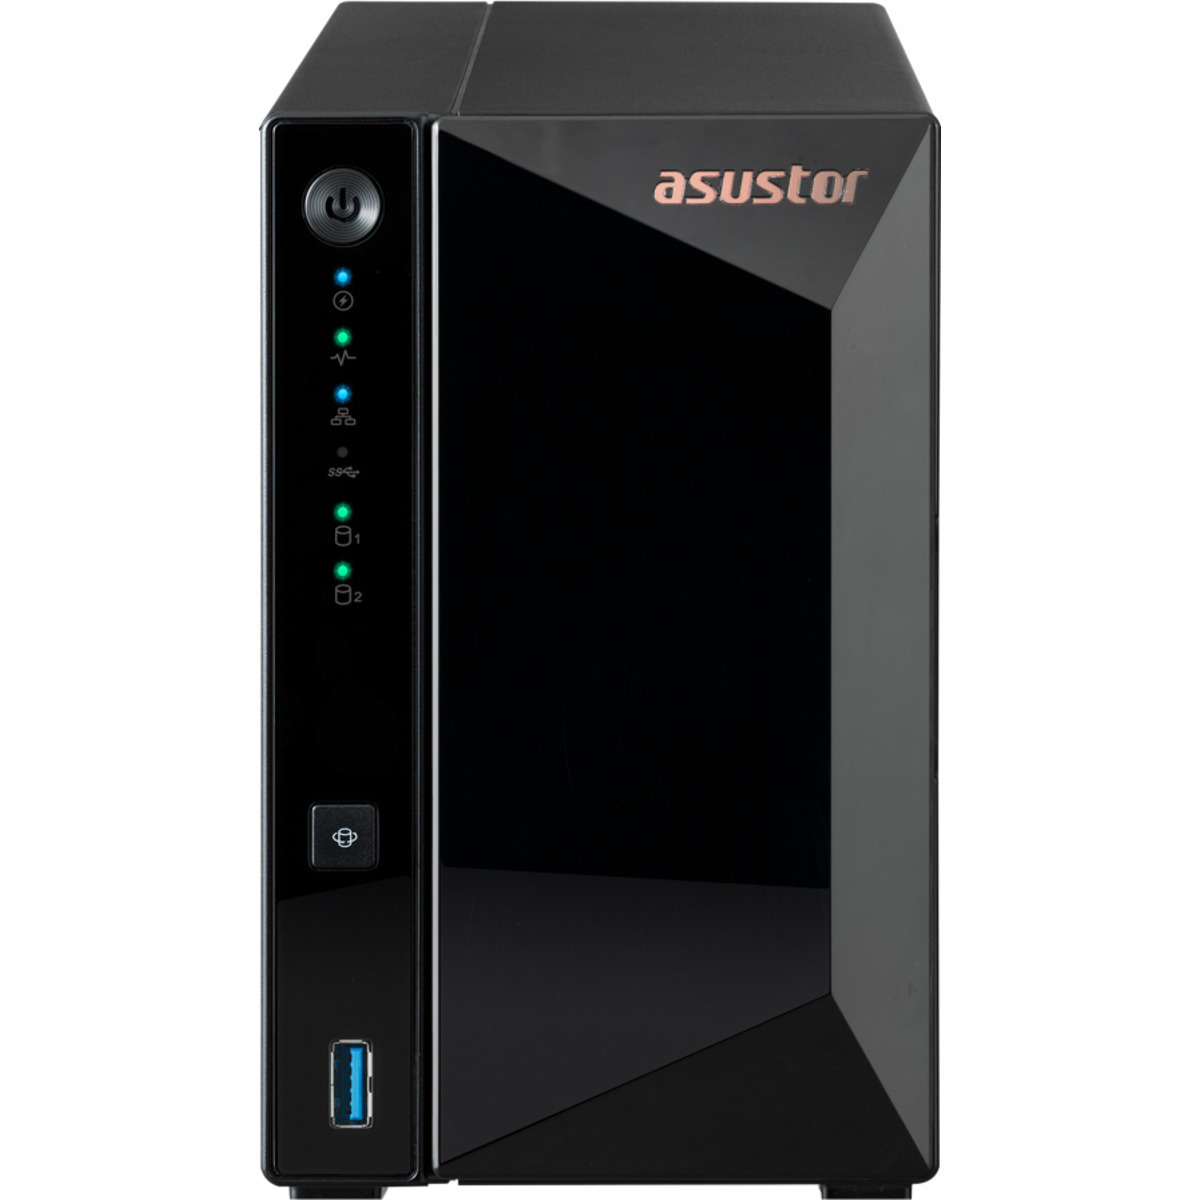 ASUSTOR DRIVESTOR 2 Pro AS3302T 20tb 2-Bay Desktop Personal / Basic Home / Small Office NAS - Network Attached Storage Device 2x10tb Western Digital Red Pro WD102KFBX 3.5 7200rpm SATA 6Gb/s HDD NAS Class Drives Installed - Burn-In Tested DRIVESTOR 2 Pro AS3302T